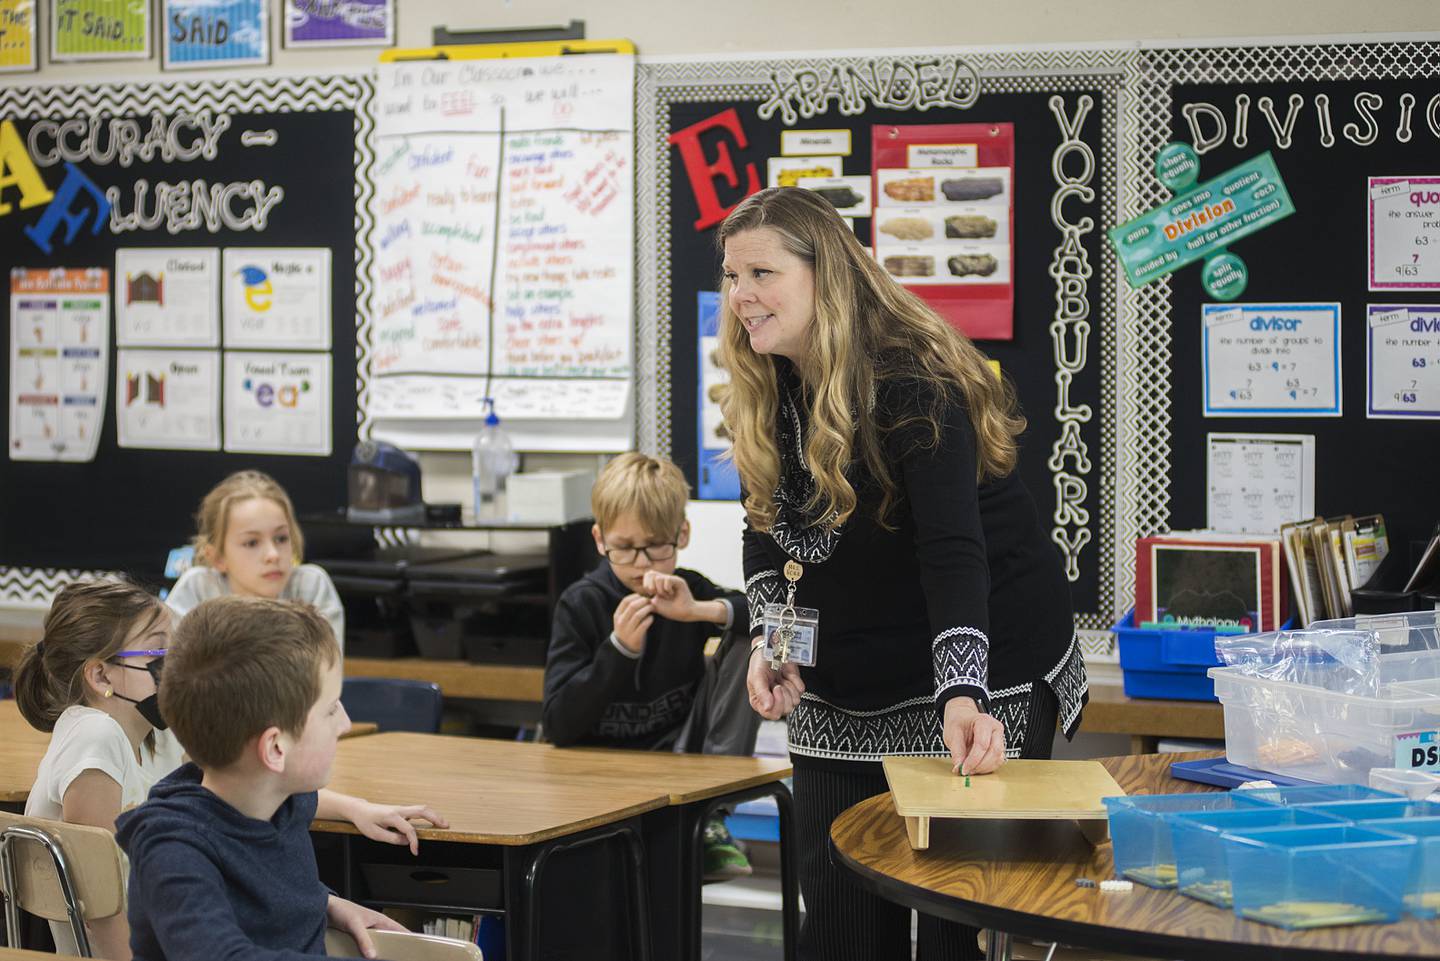 Madison School fourth grade teacher Kim Bork leads her class in an assignment at the Dixon school.  Bork is the president of of the Sauk Valley Reading council and has been named the Sauk Valley Media and KSB Hospital's Dixon Amazing Teacher in 2020 and received the Family Literacy Award in 2021.